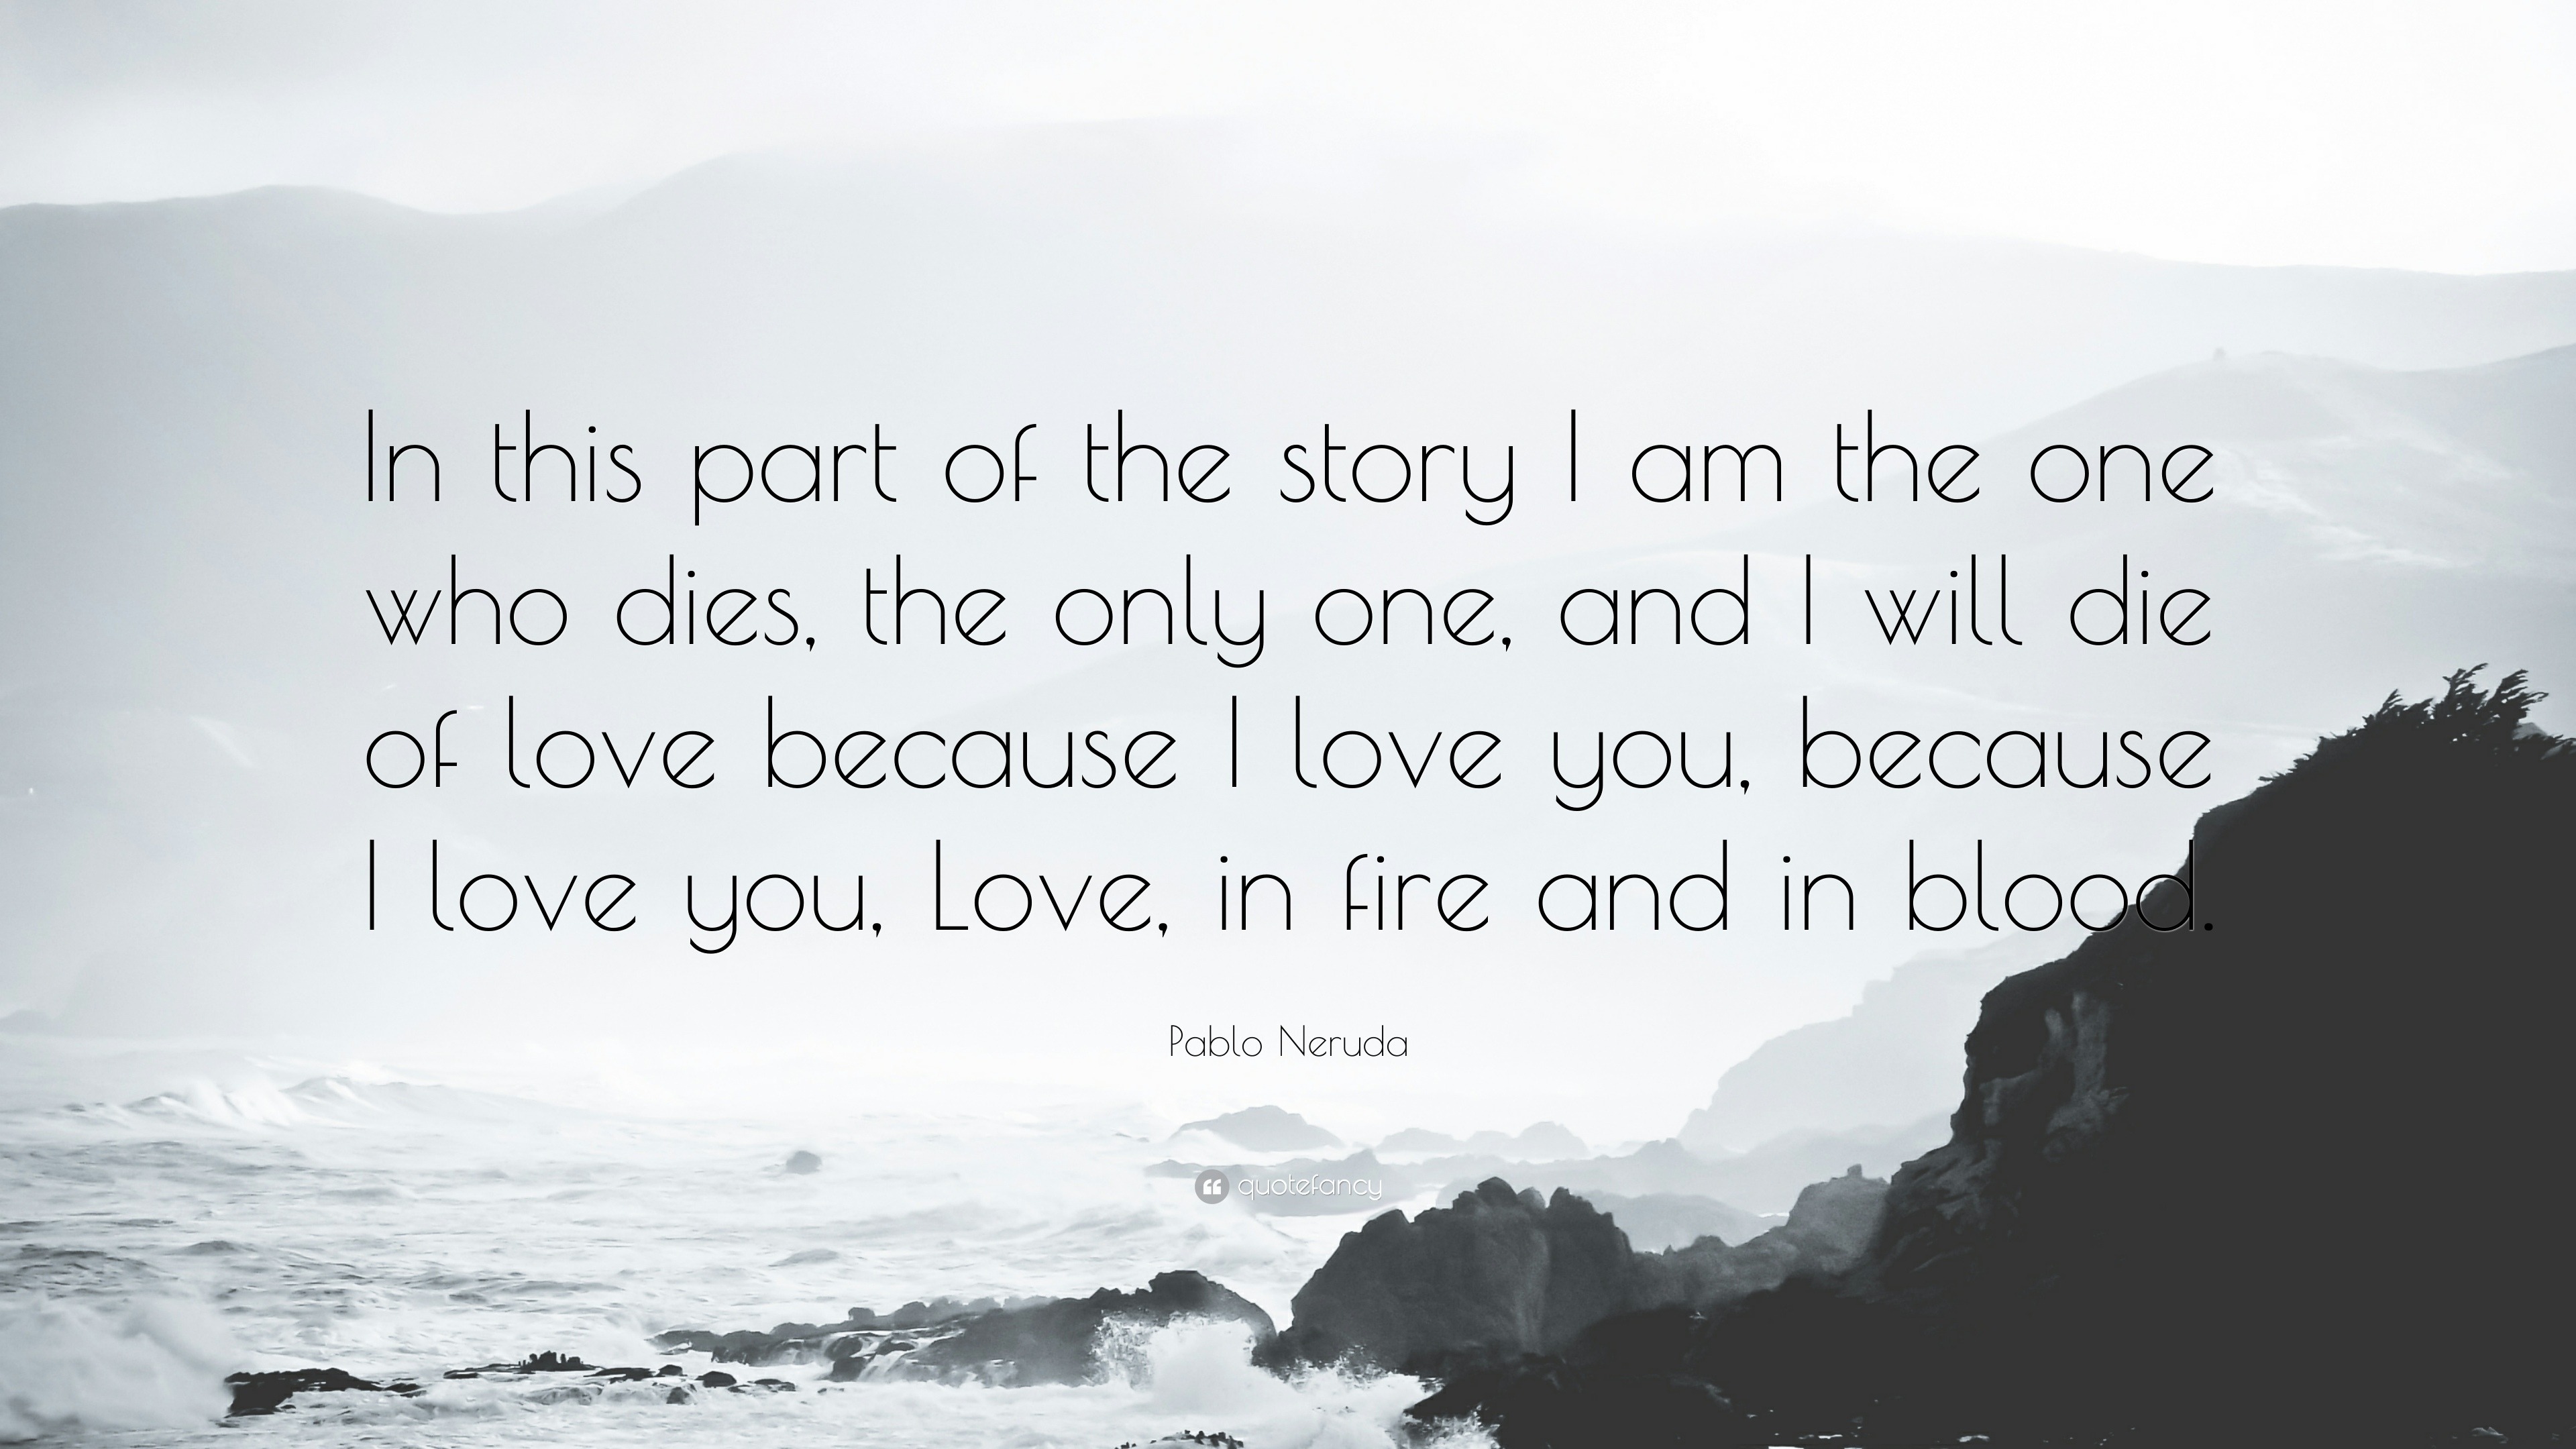 Pablo Neruda Quote “In this part of the story I am the one who